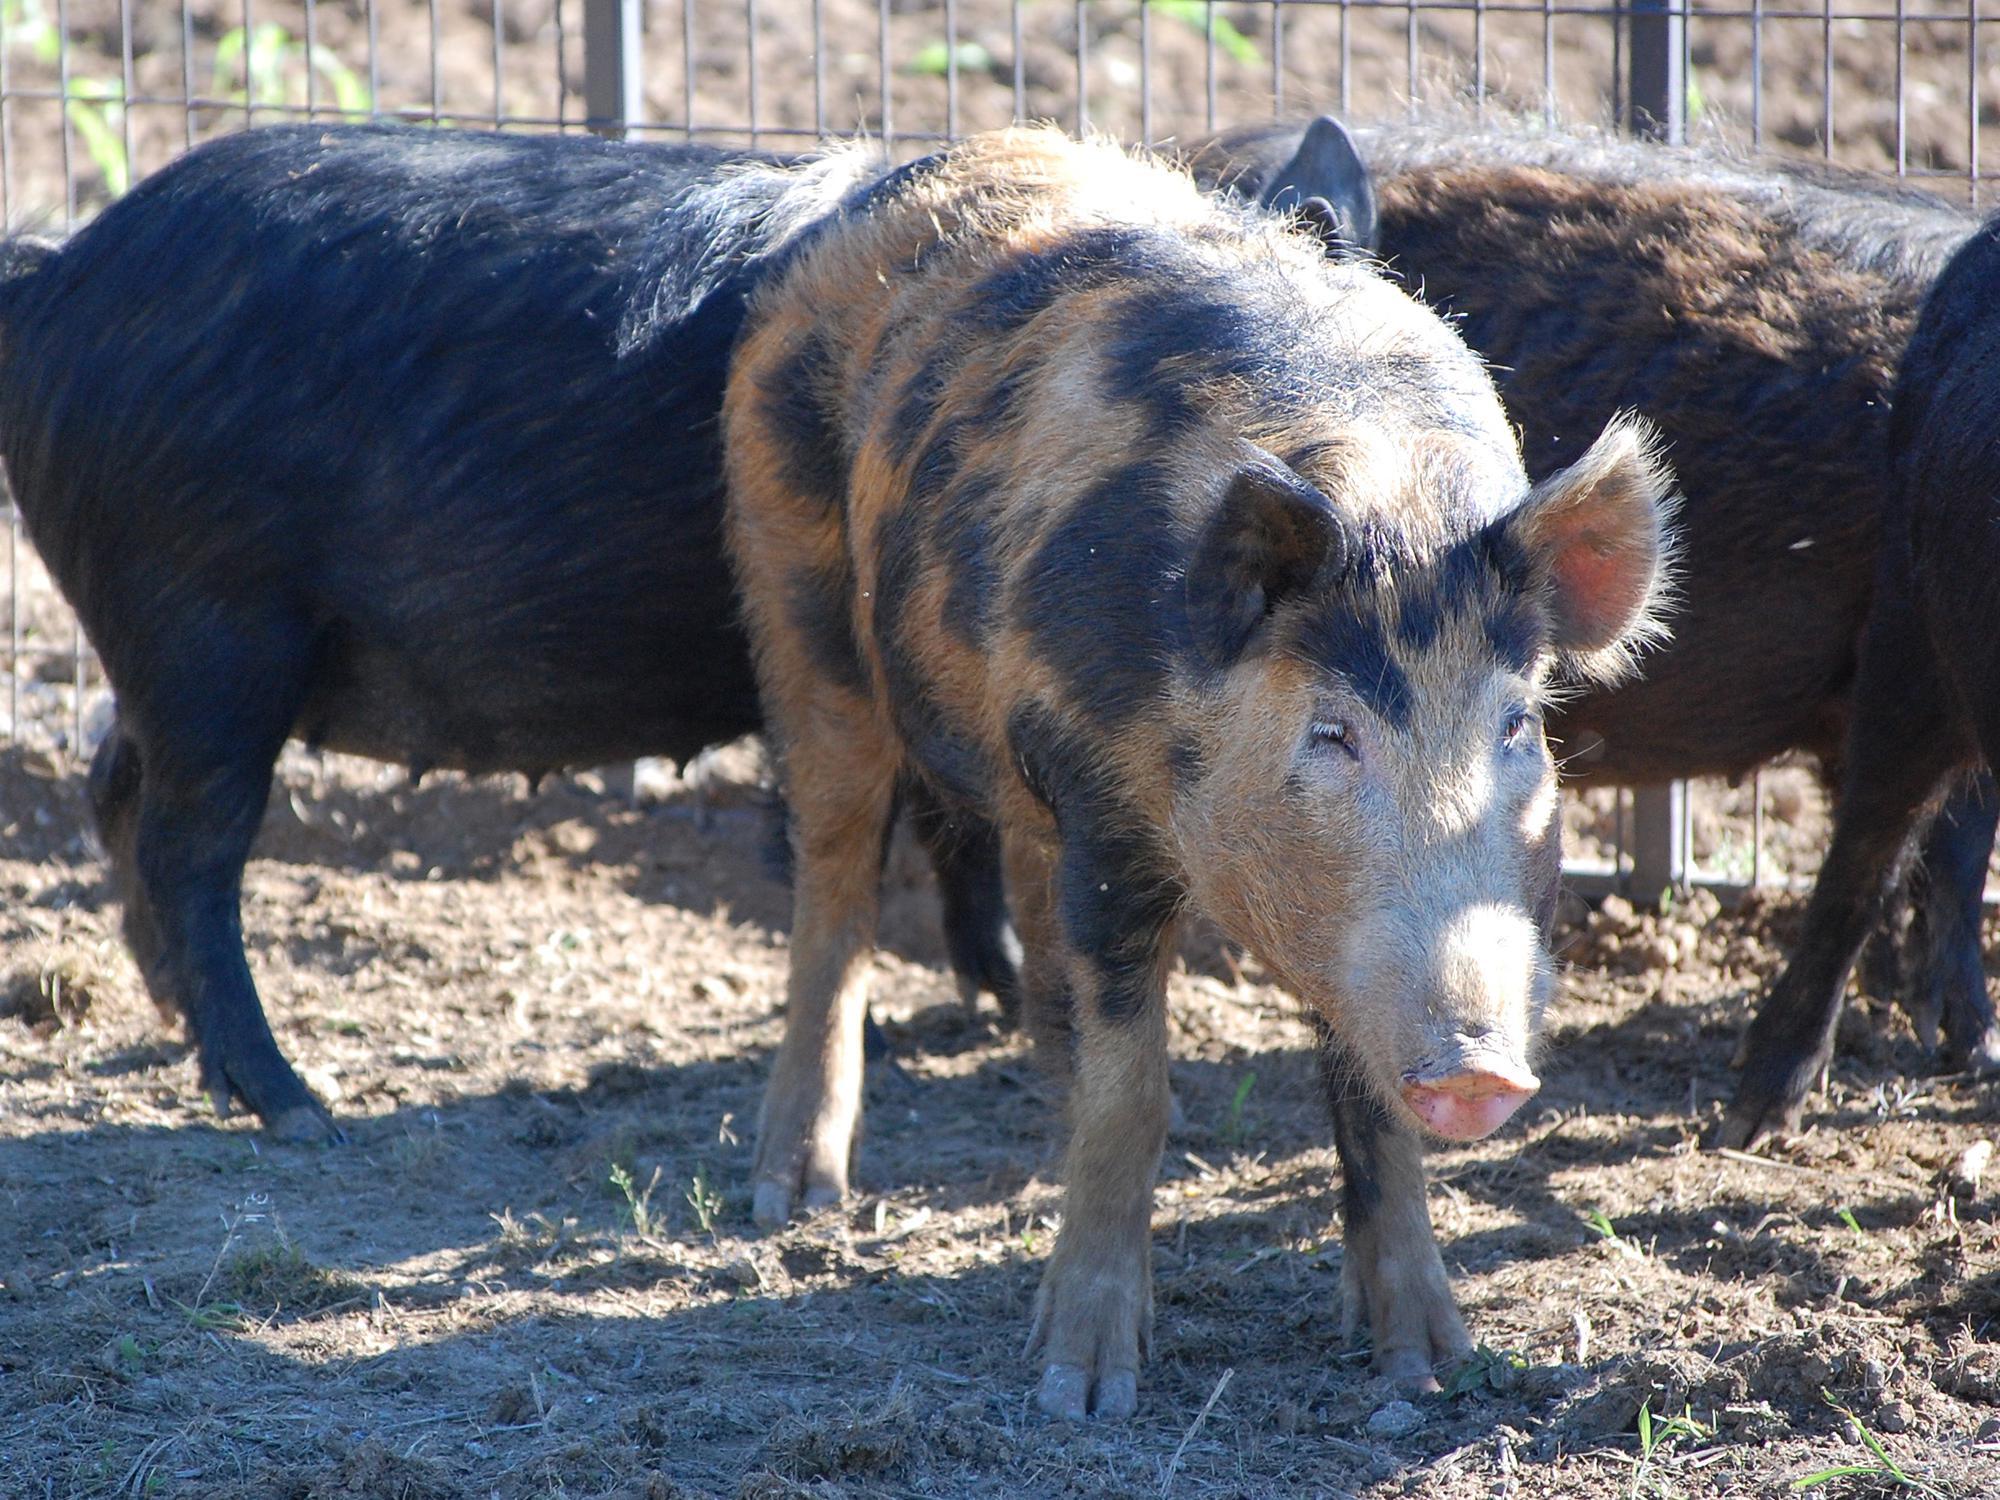 An orange wild hog with large black spots stands in a trap with two black wild hogs in the background.